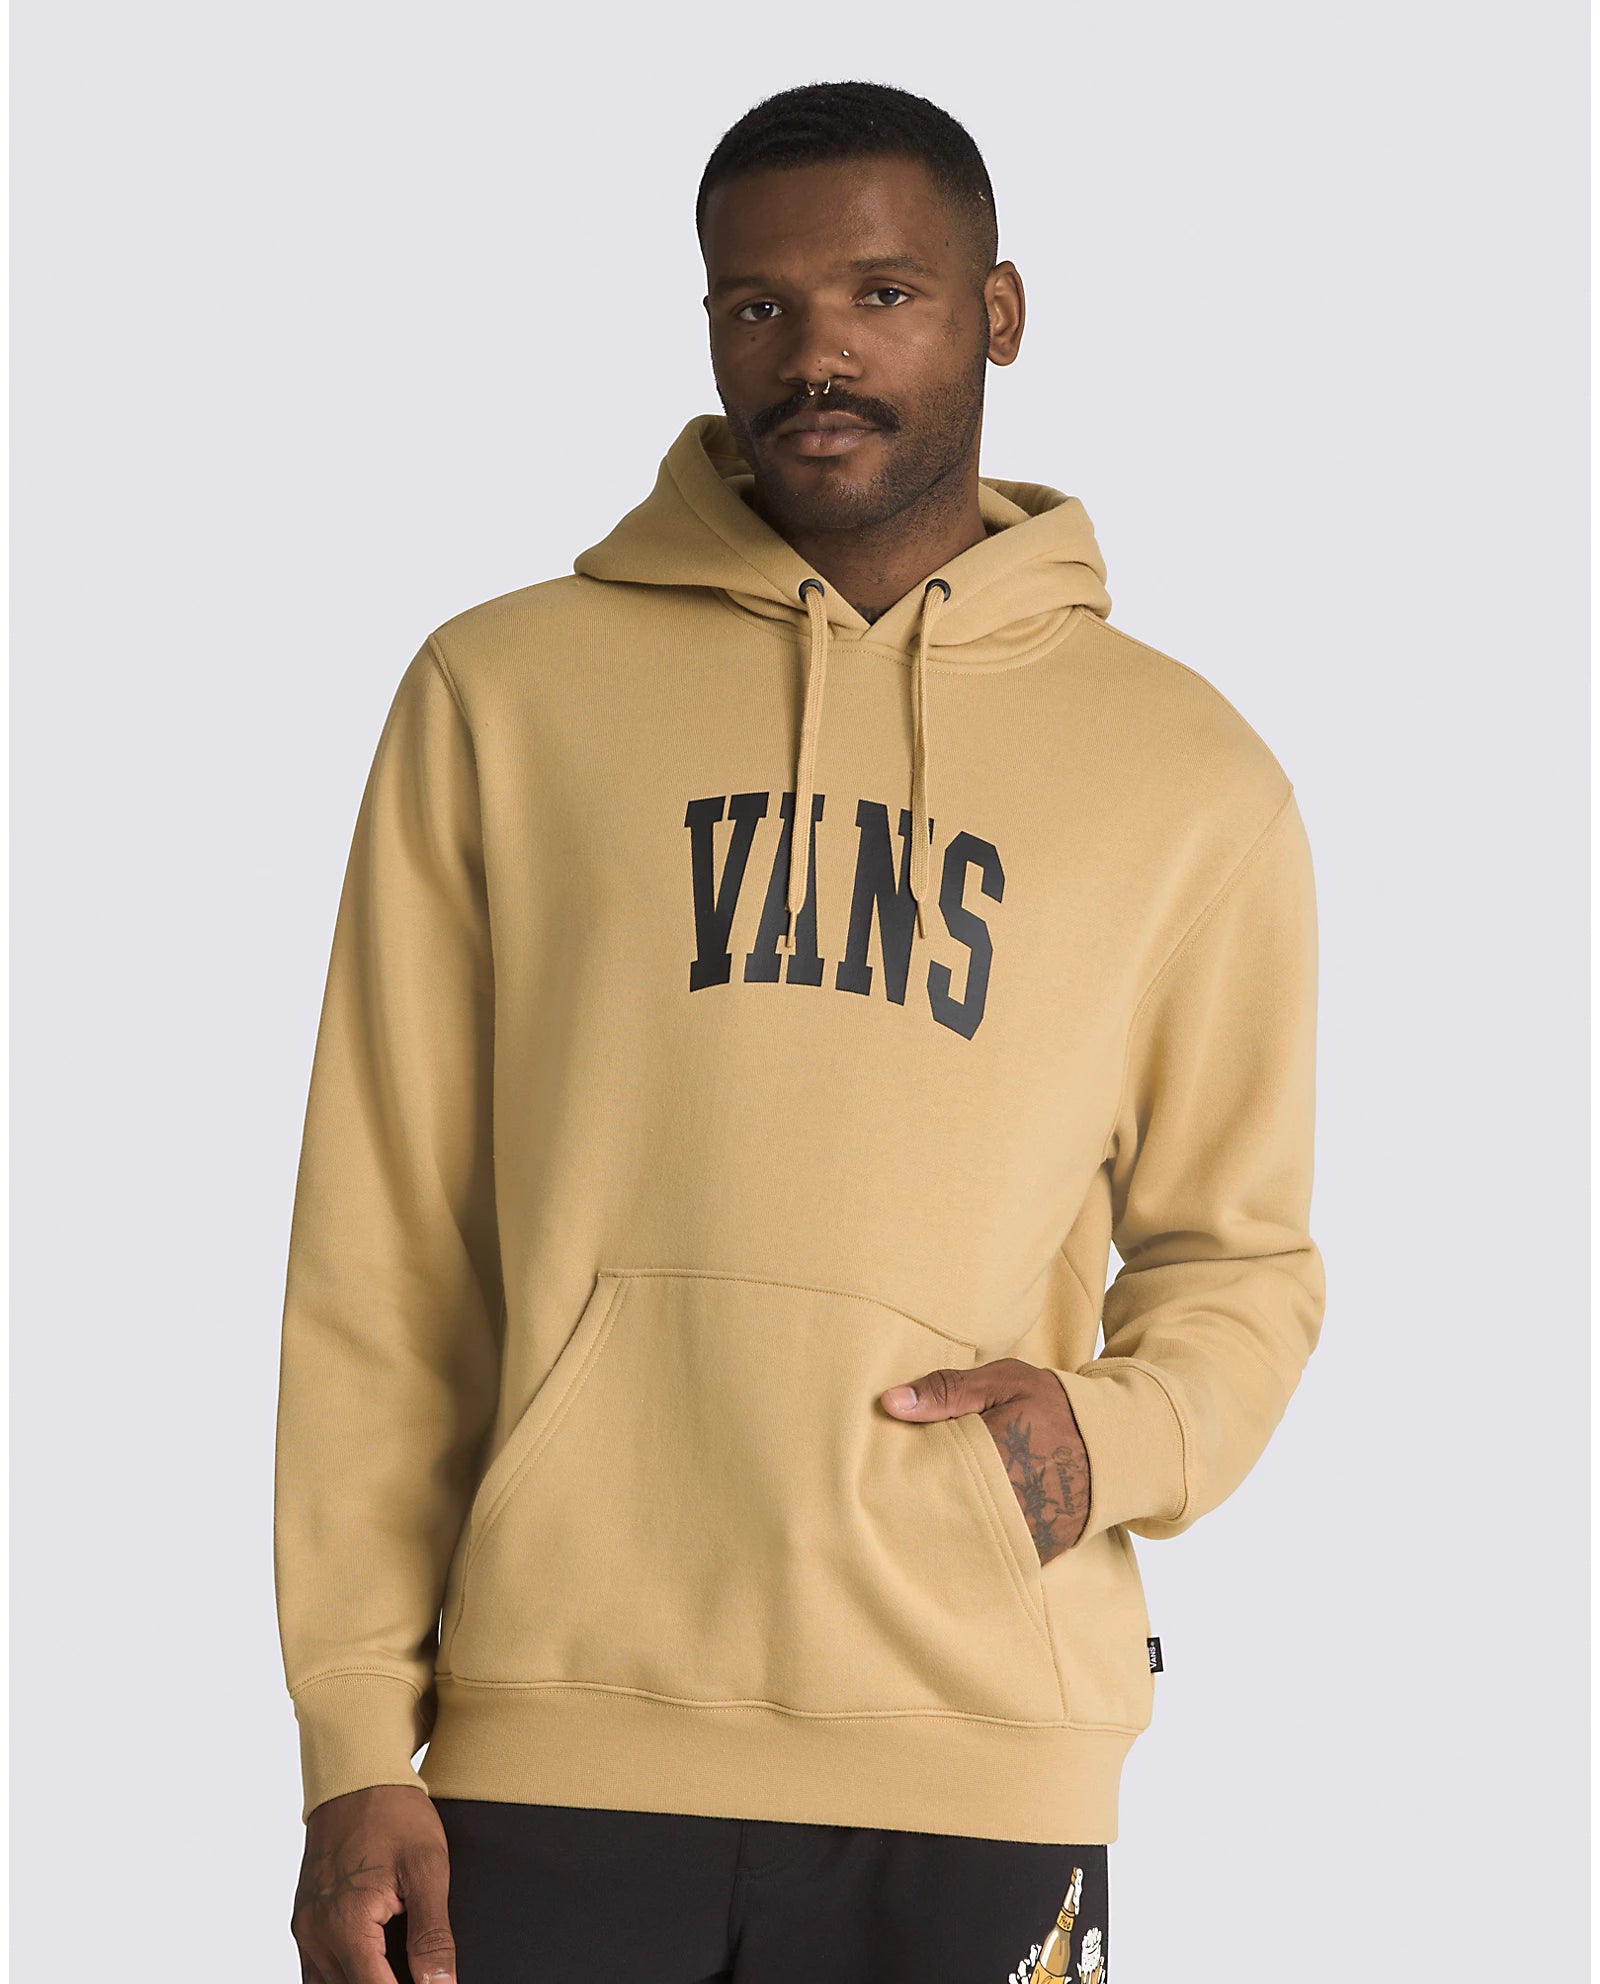 Vans Arched Pull Over Hoodie Sweat Shirt - Antelope – SURF WORLD SURF SHOP